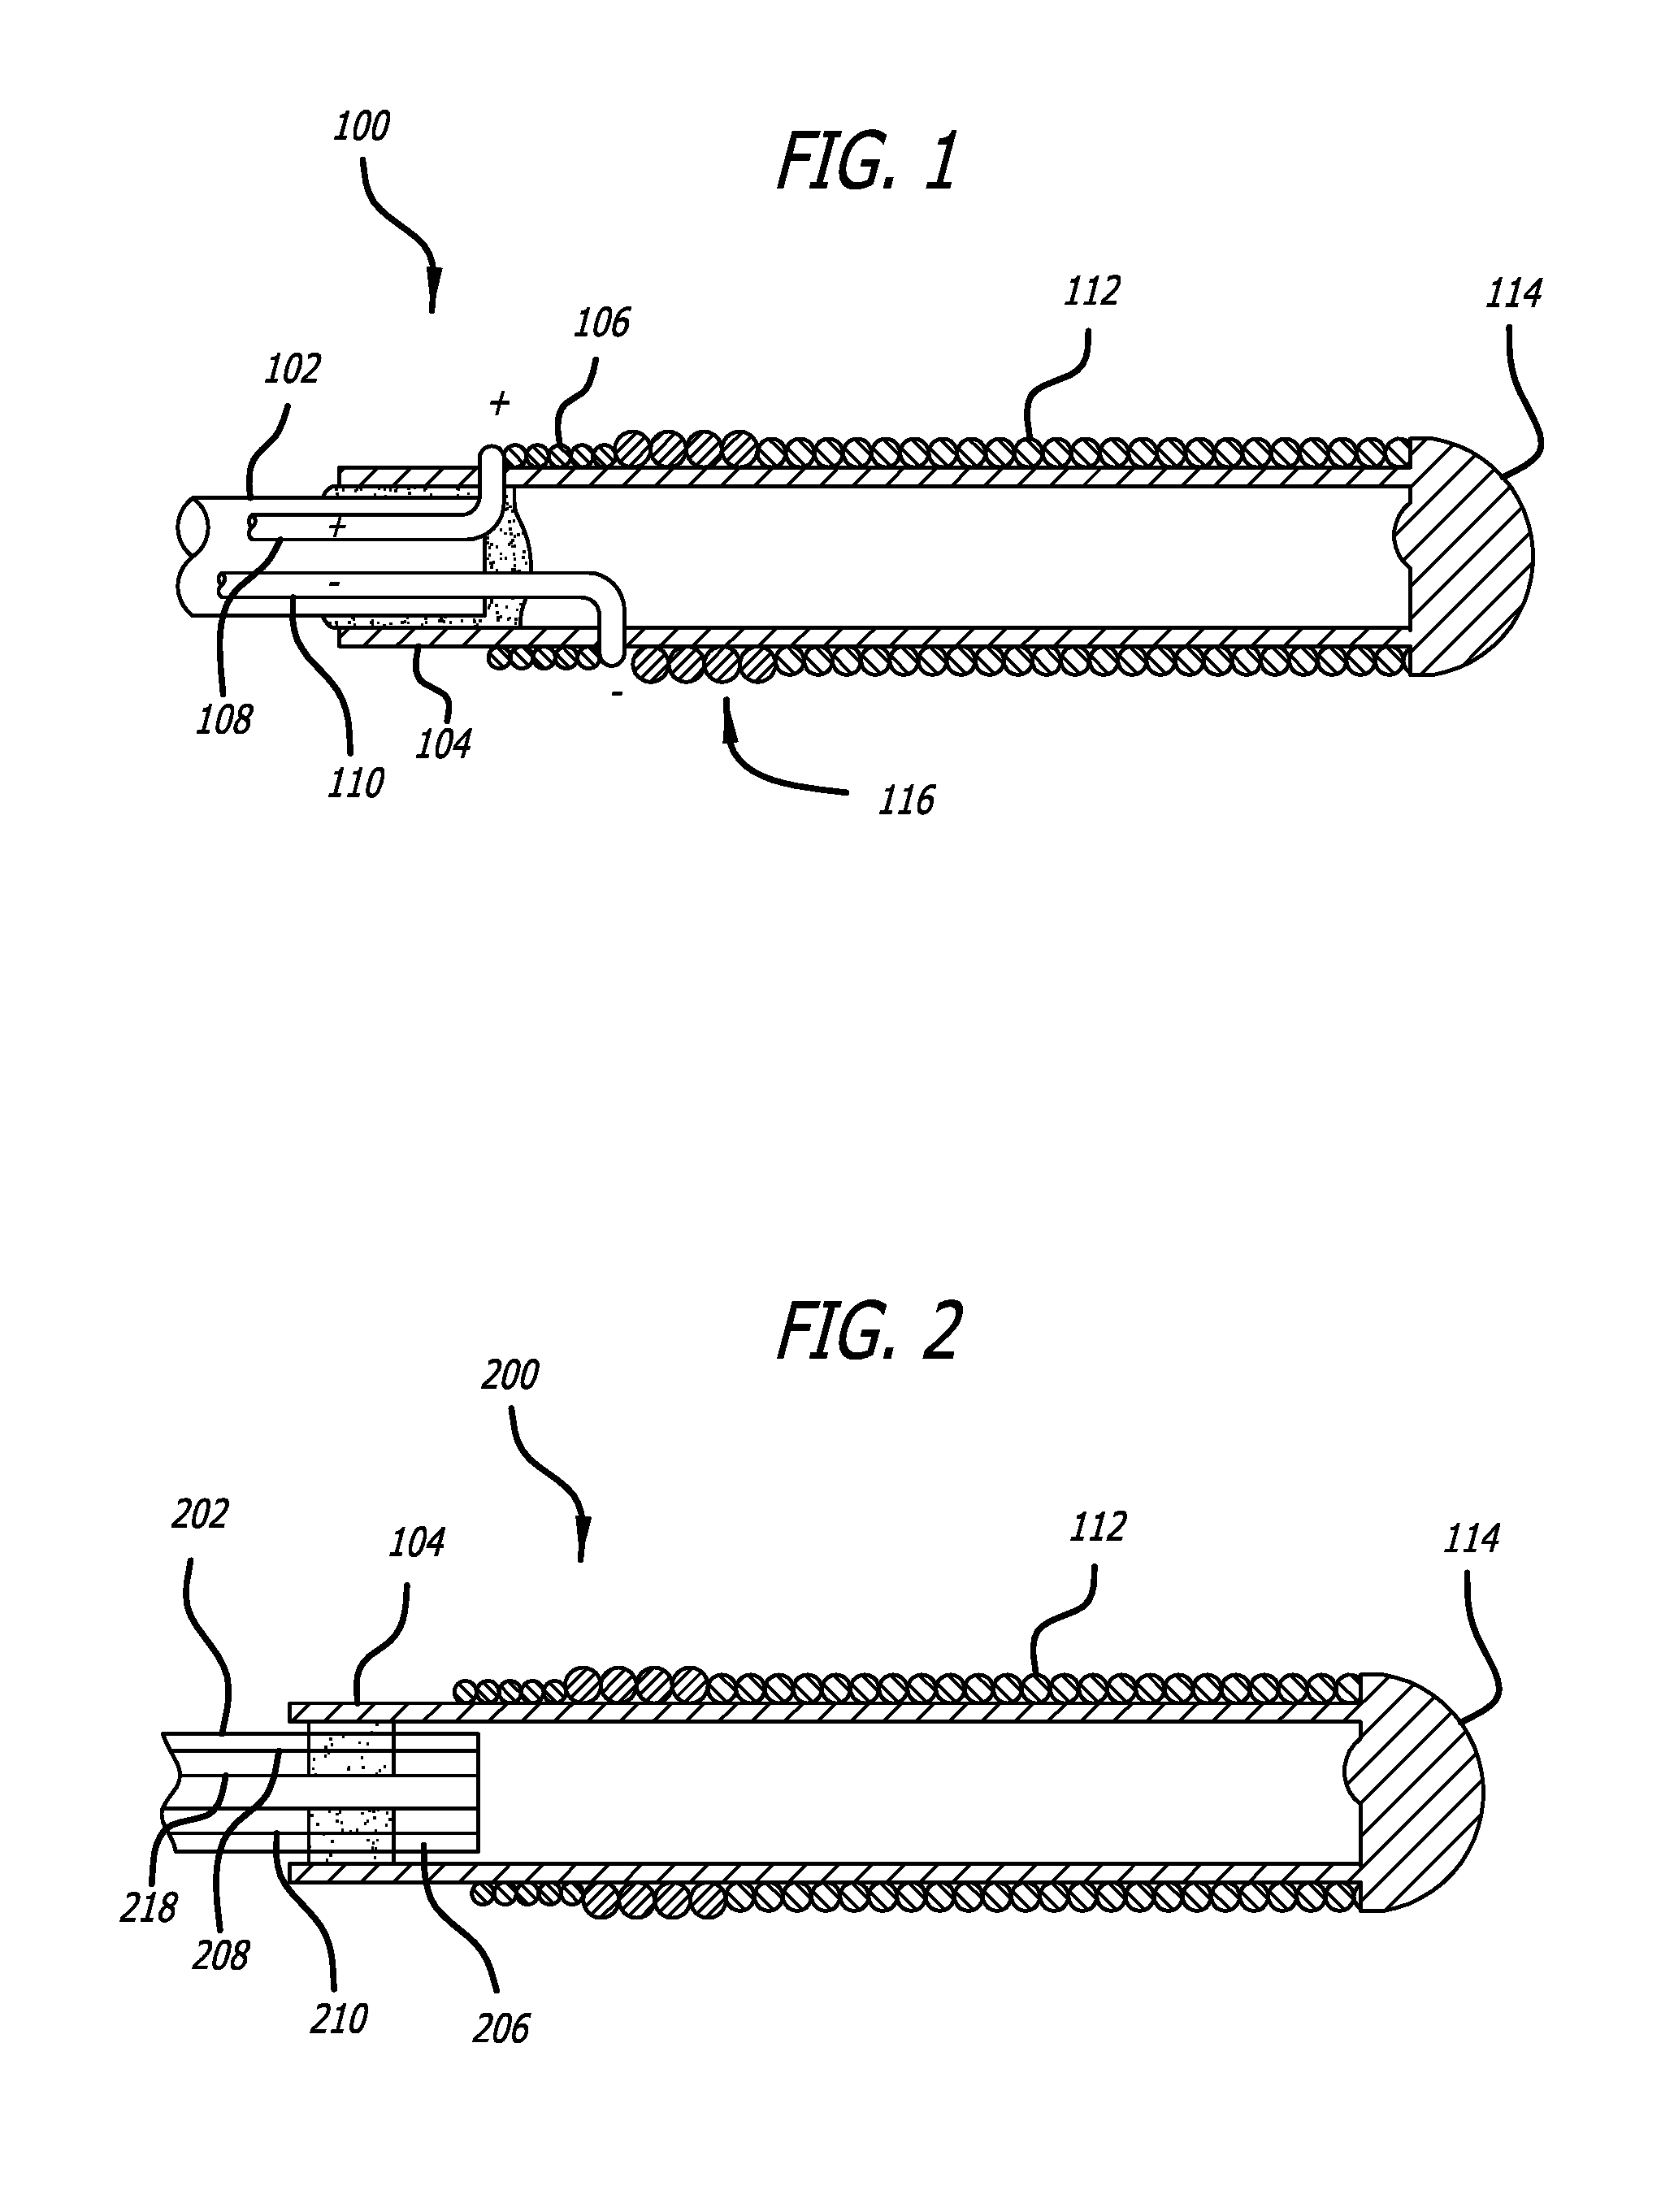 Implant Delivery System